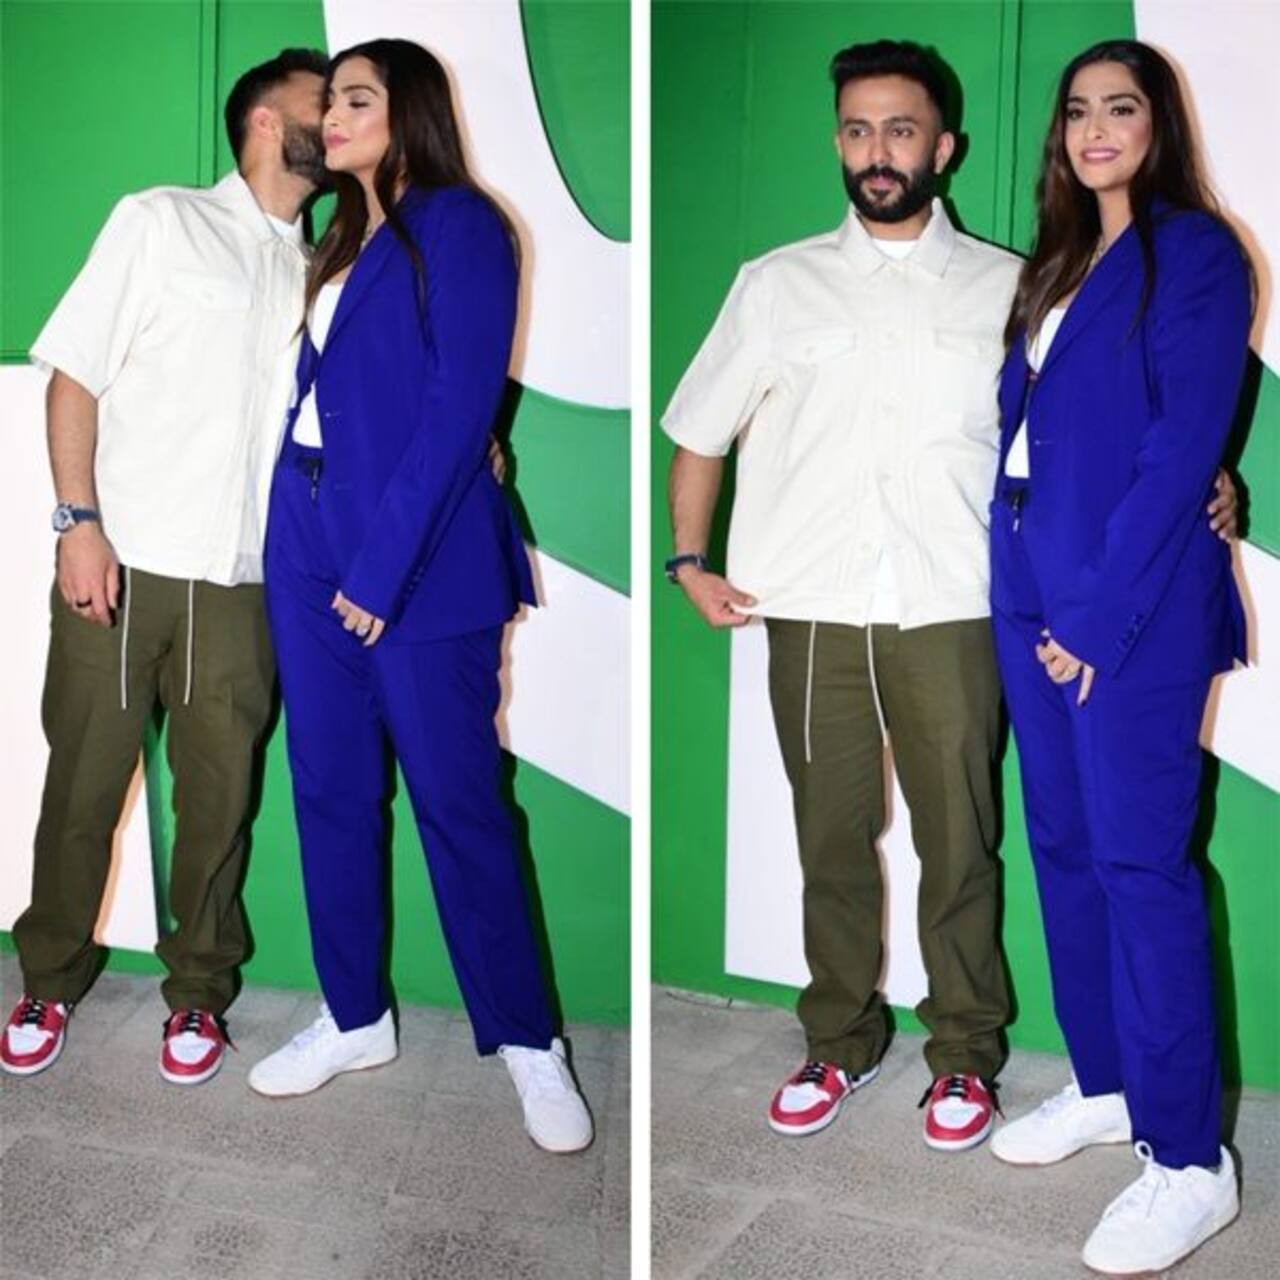 Mom-to-be Sonam Kapoor steps out with hubby Anand Ahuja for the first time post pregnancy announcement – watch video